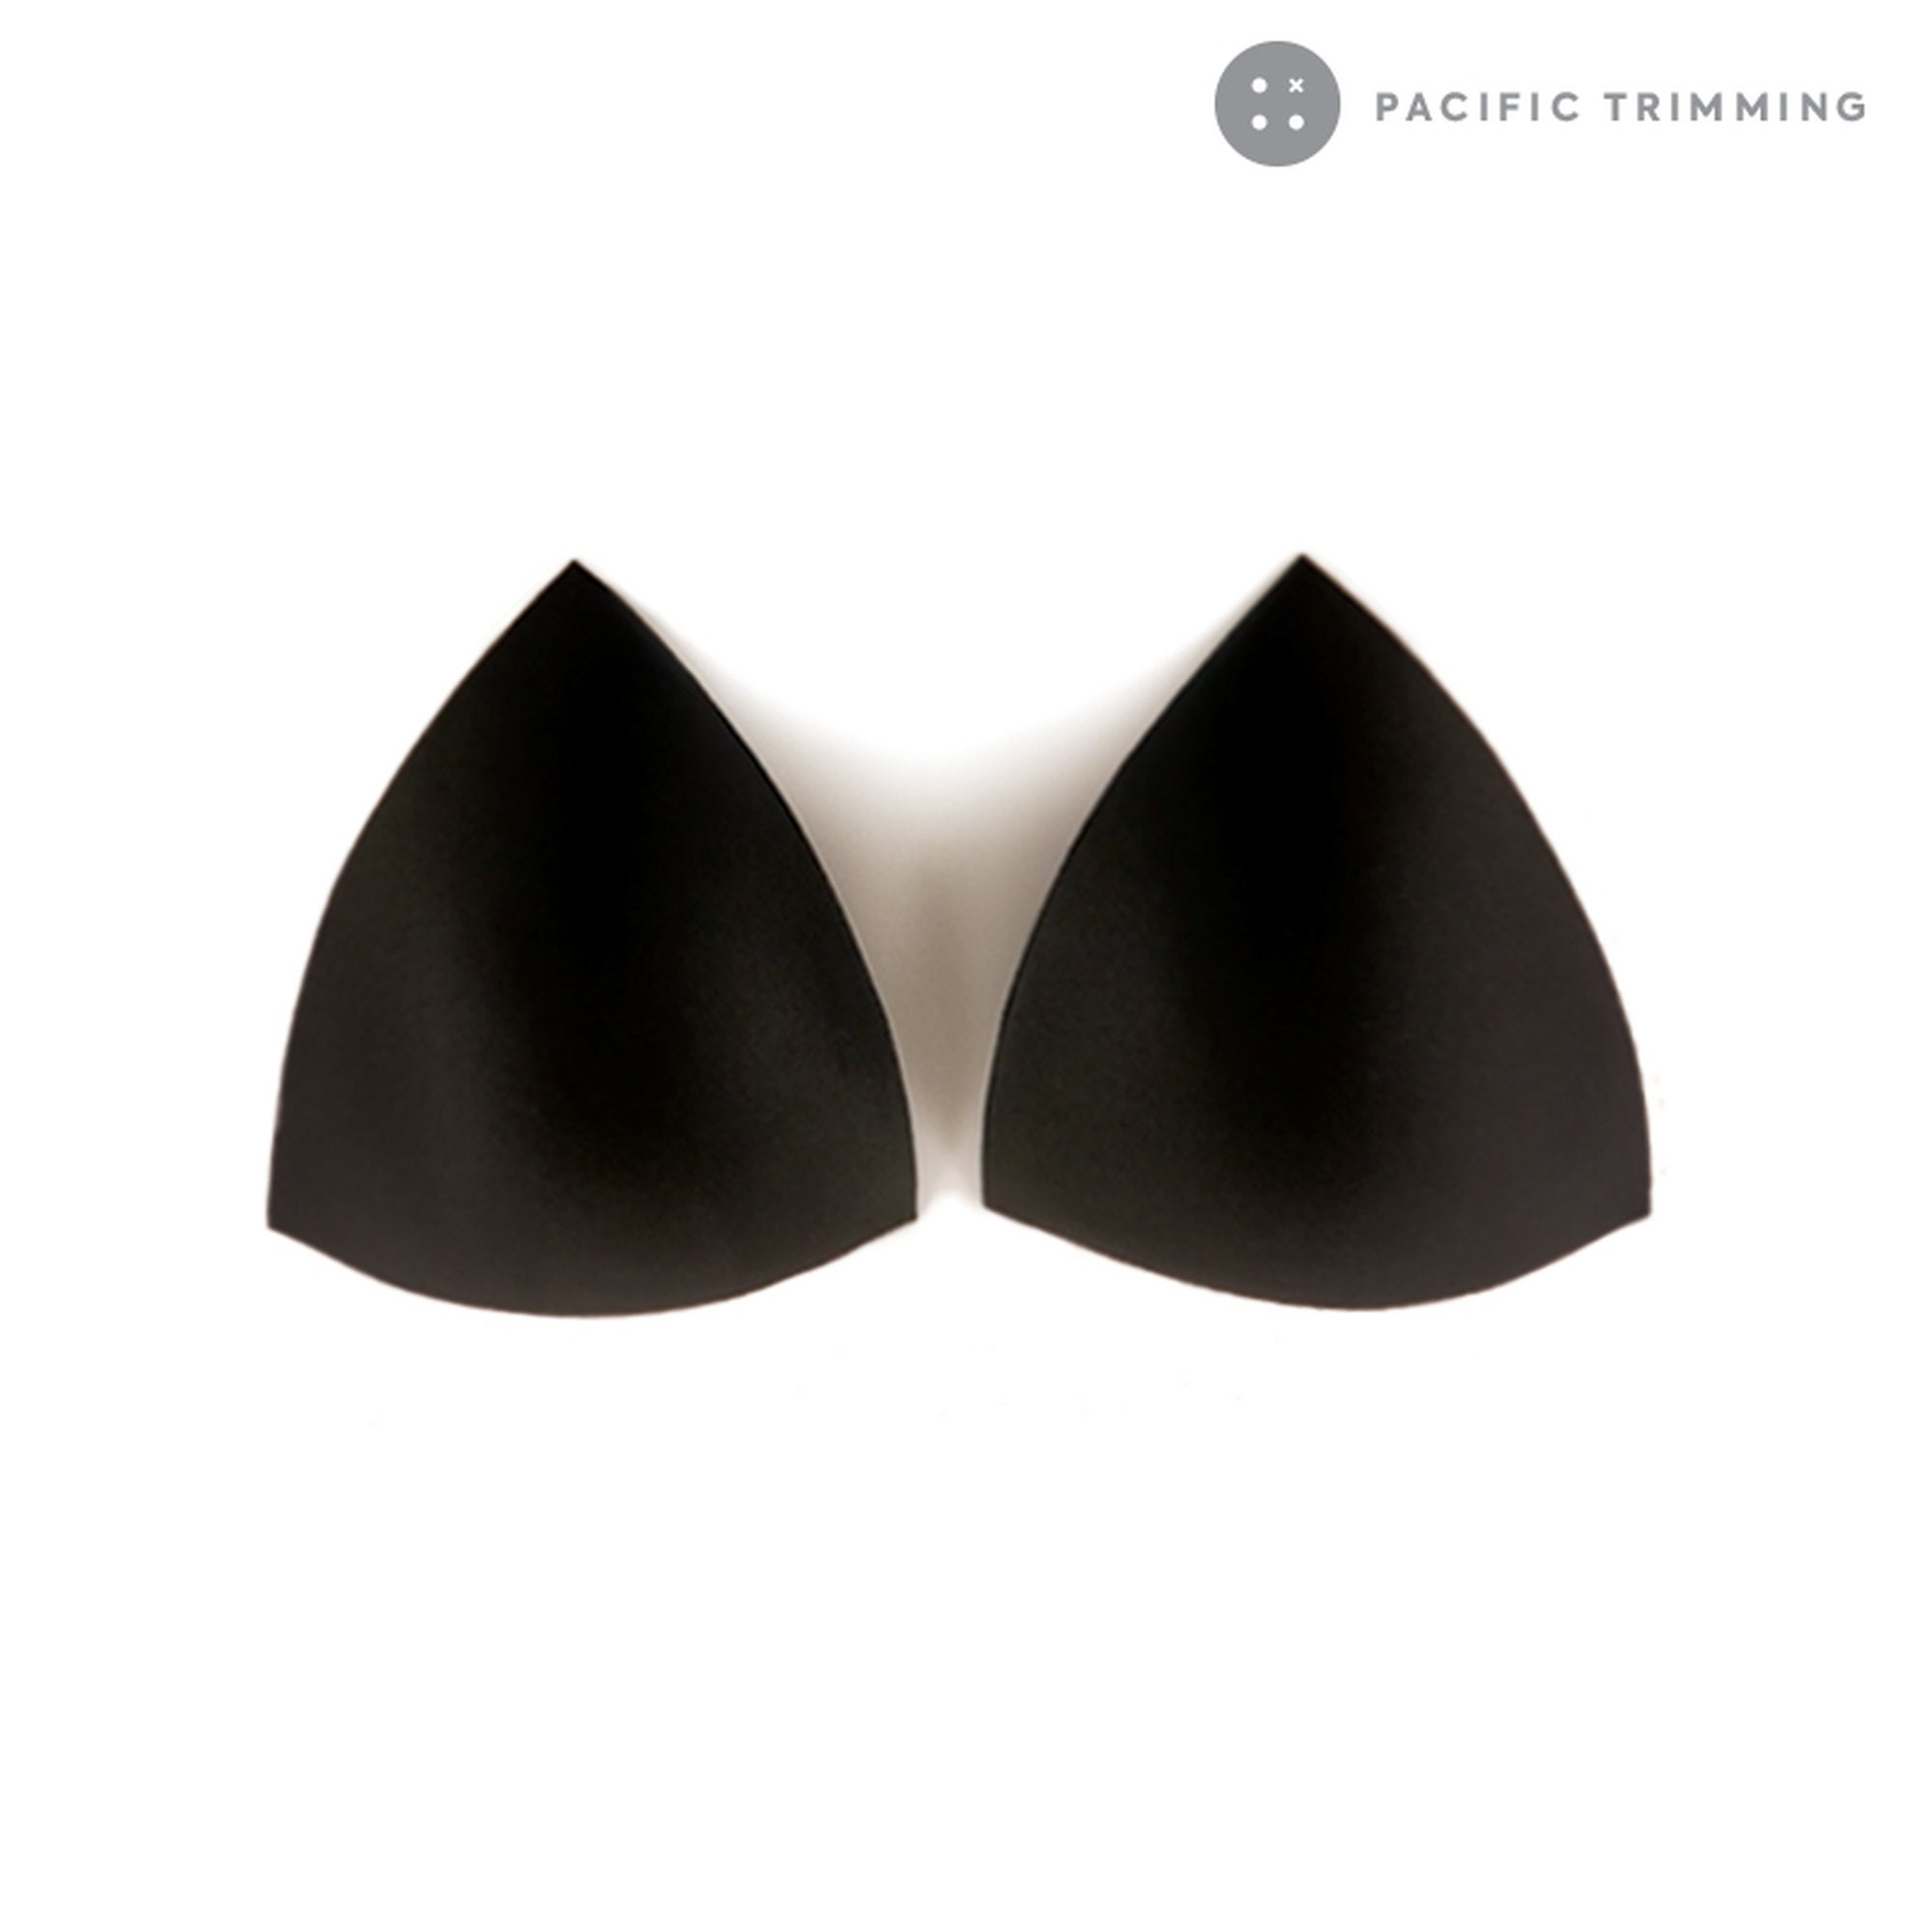 Caitlin plunge cup bra by Touchable